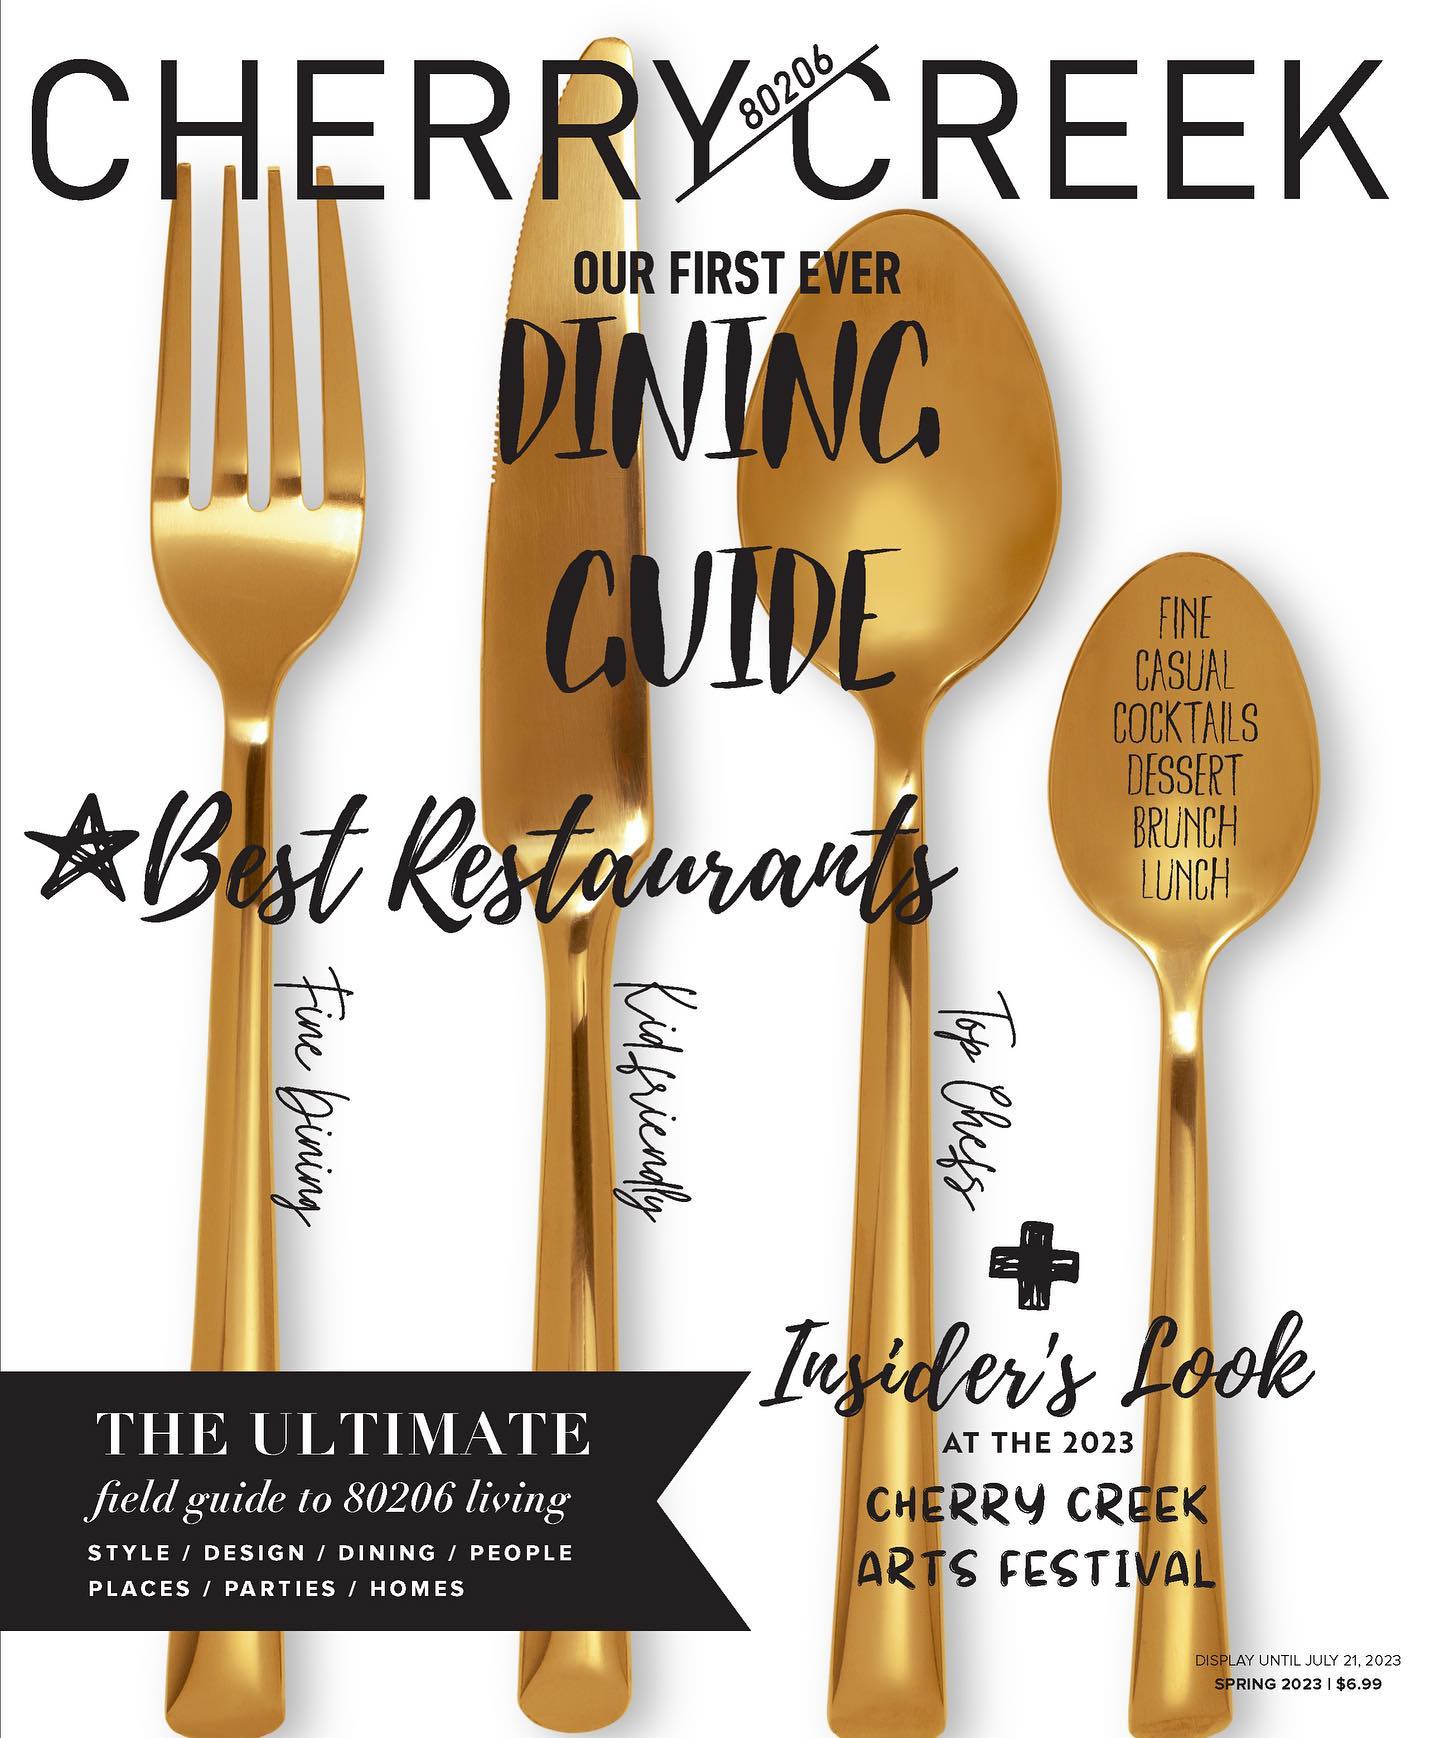 Our Spring Issue is live! Featuring our first ever Cherry Creek Dining Guide, we explore the best of the neighborhood’s restaurants and watering holes; get an insider’s look at the Cherry Creek Arts Festival; learn more about the district’s most dynamic business owners; step behind the bar at Local Jones…and more. Link in bio to read the digital edition, and check your mailbox for a hard copy, too (nothing beats print if you ask us). 🍒
.
.
.
#cherrycreek #supportlocal #cherrycreekmag #cherrycreekevents #denverrealestate #denverdining #cherrycreekliving #cherrycreekeats